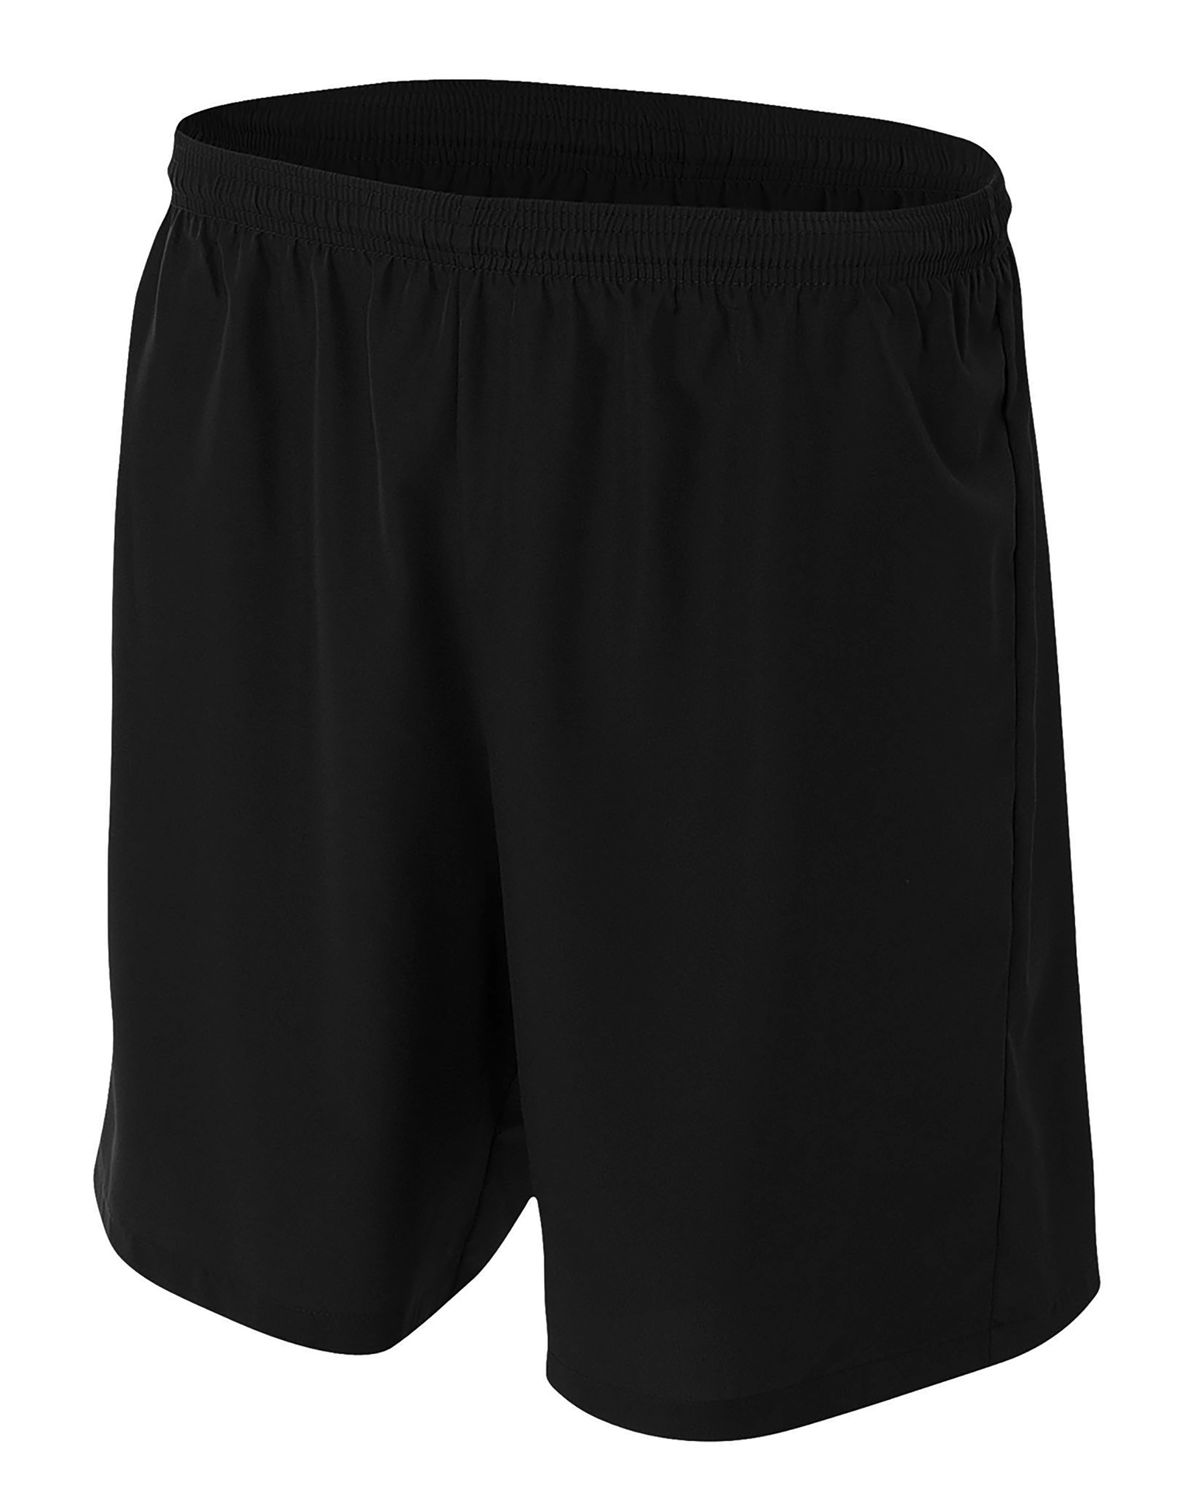 'A4 NB5343 Youth Woven Soccer Shorts'